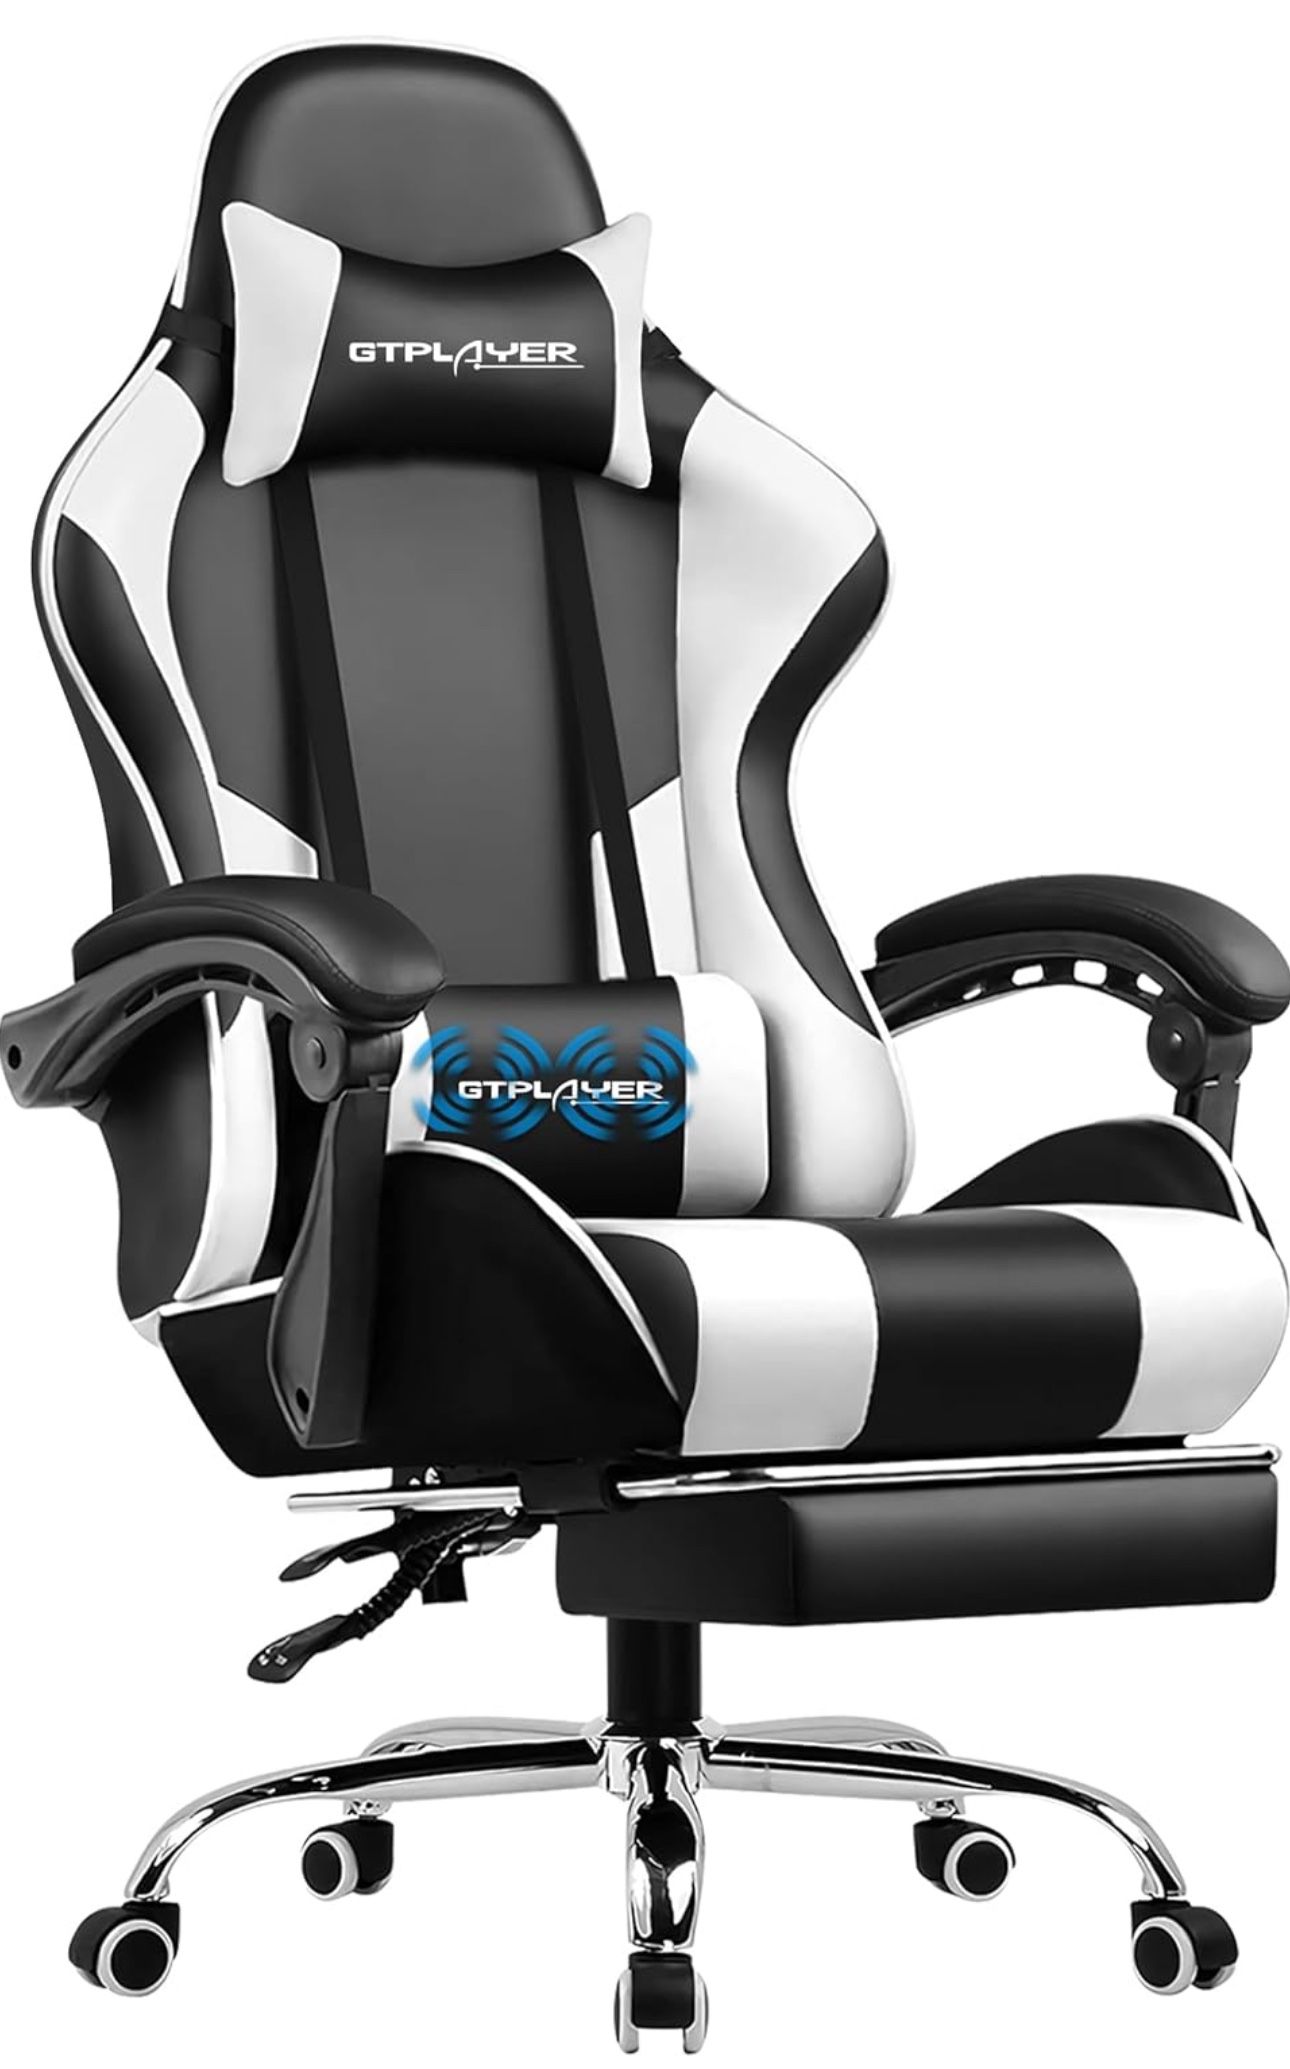 Gaming Chair With Massager Leg Extension New In Box 